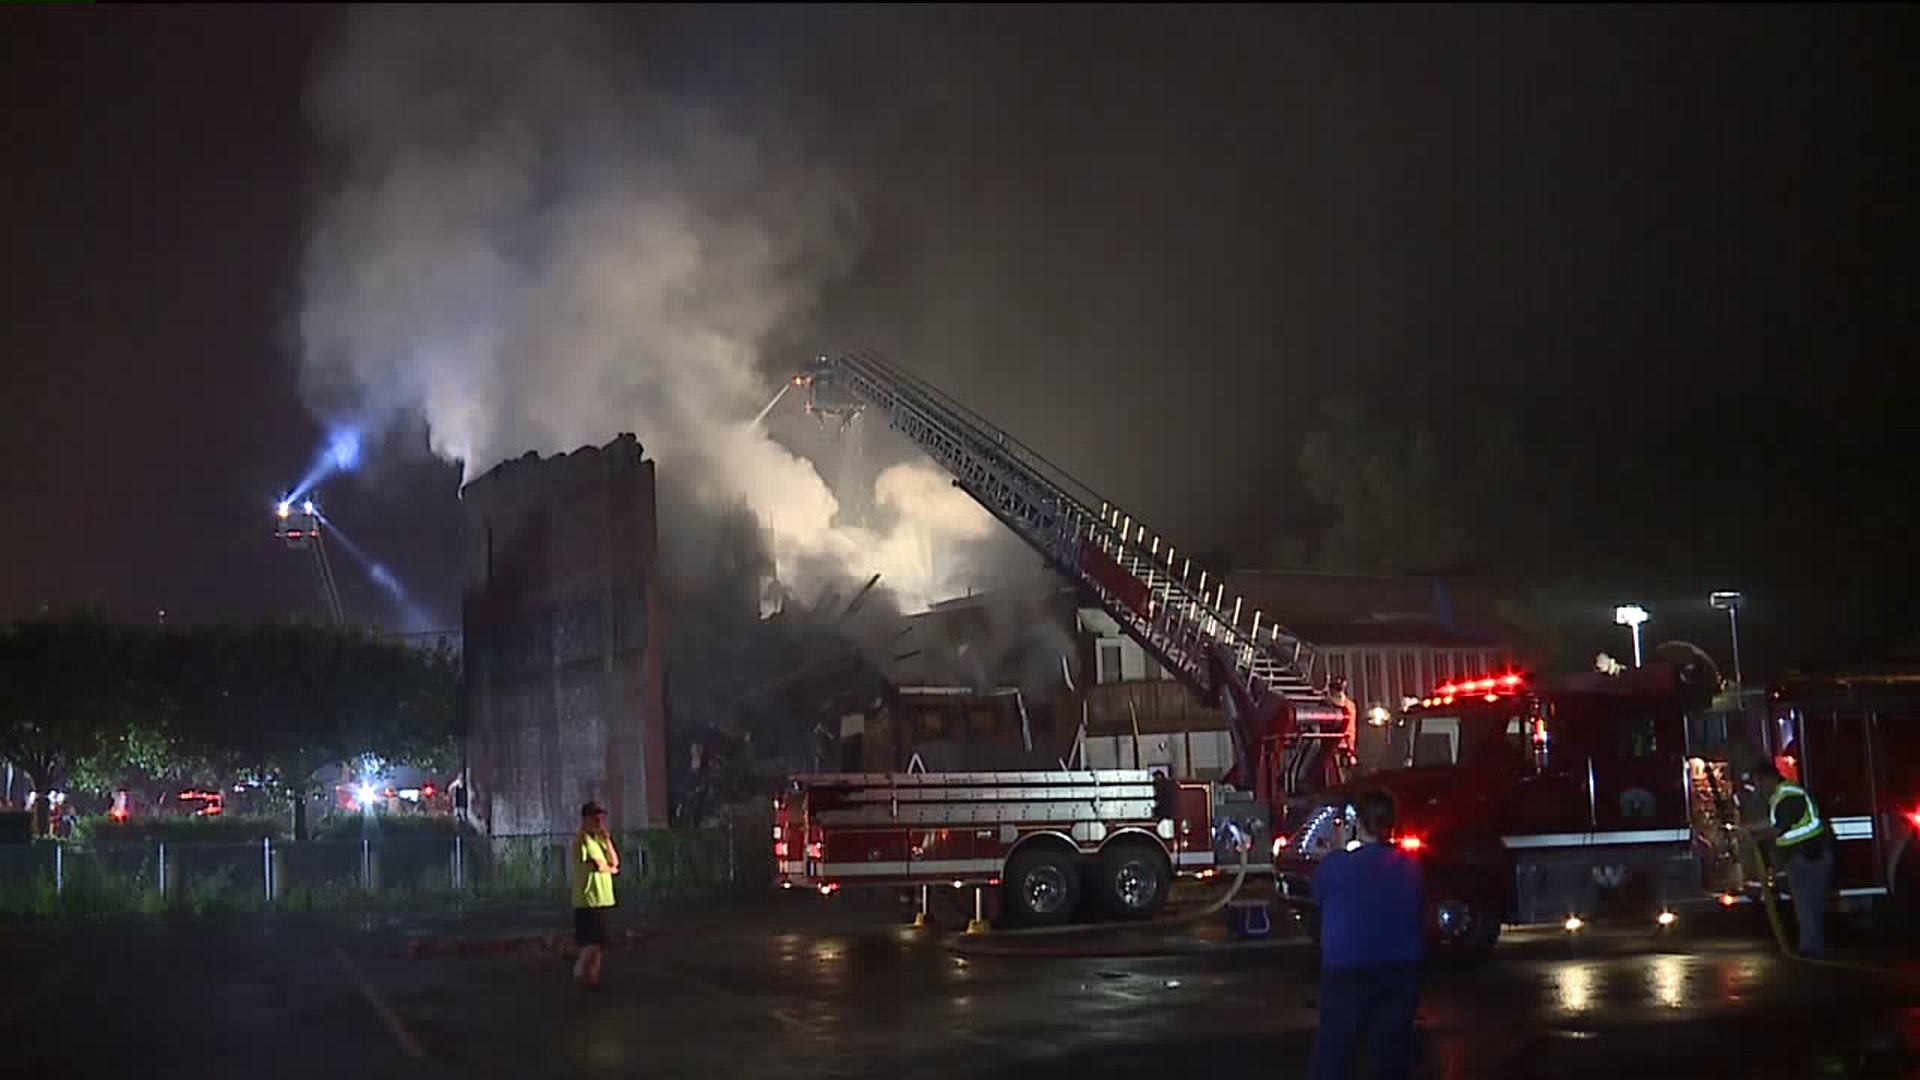 Firefighters Battle Flames in 100-year-old Building in Susquehanna County